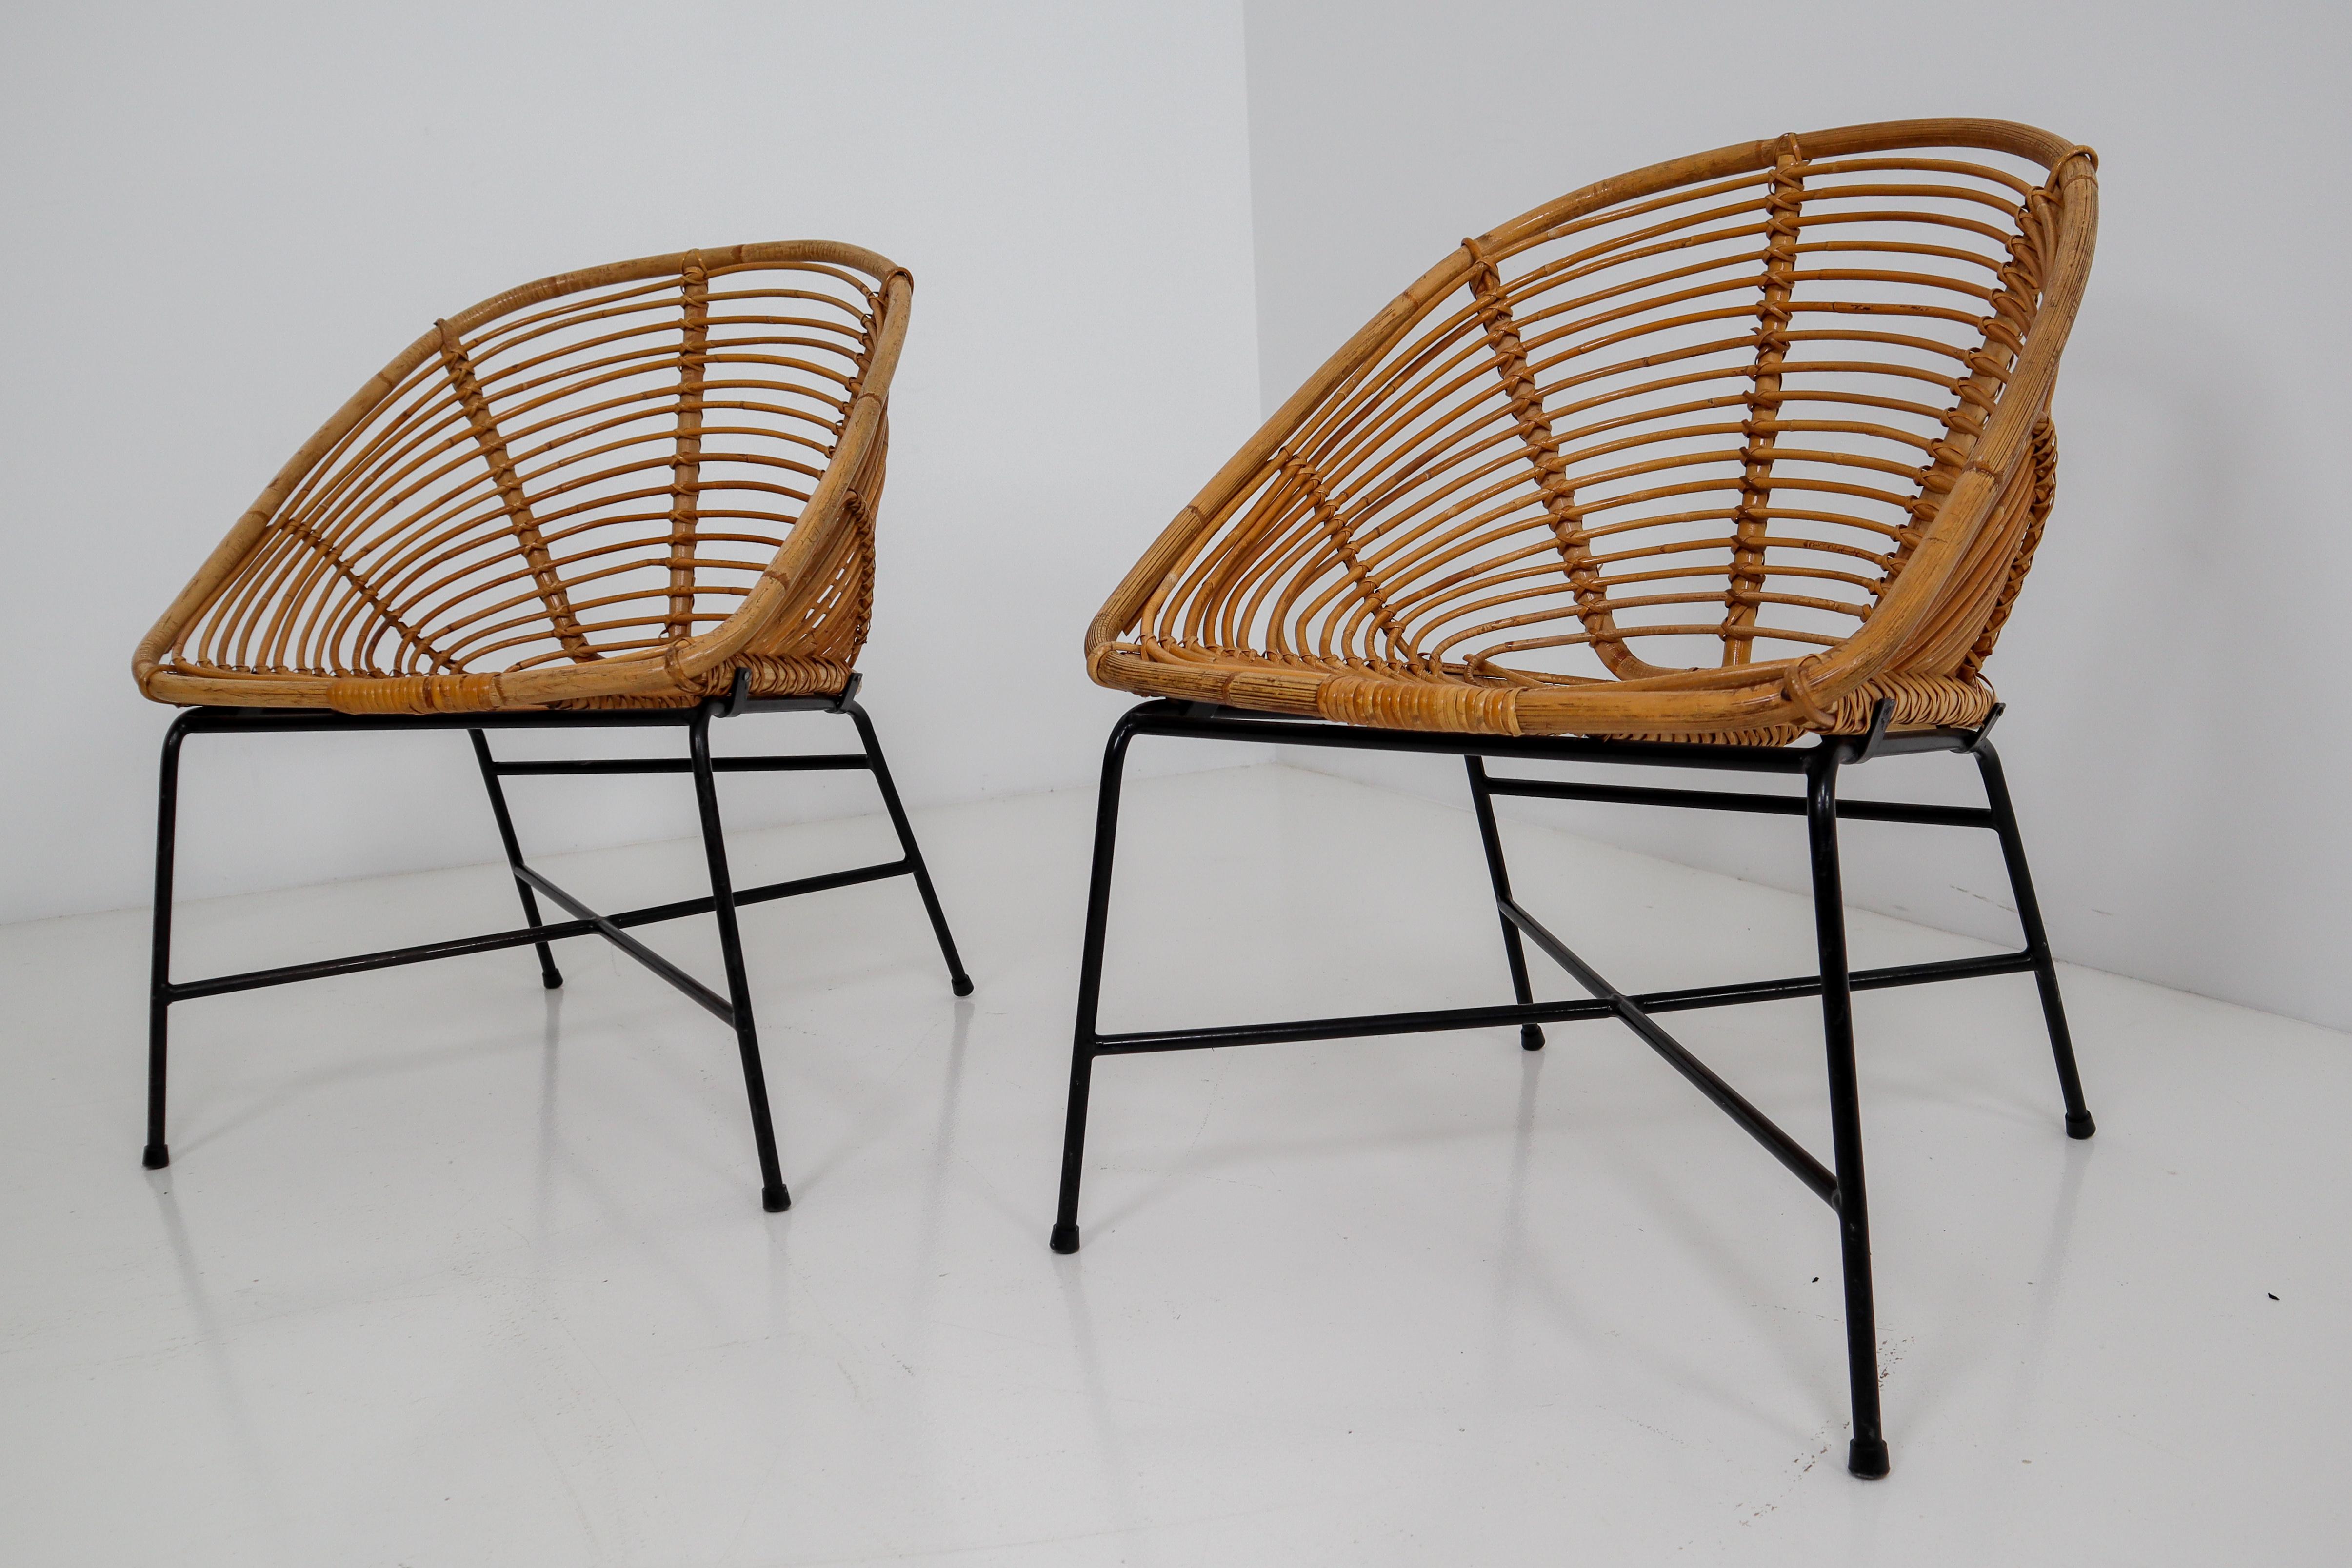 Elegant Italian rattan, wicker and iron chairs. Rattan in excellent condition. The frame is made of black lacquered steel. They are comfortable to sit in and create an inviting sitting experience. In very good vintage condition with light wear and